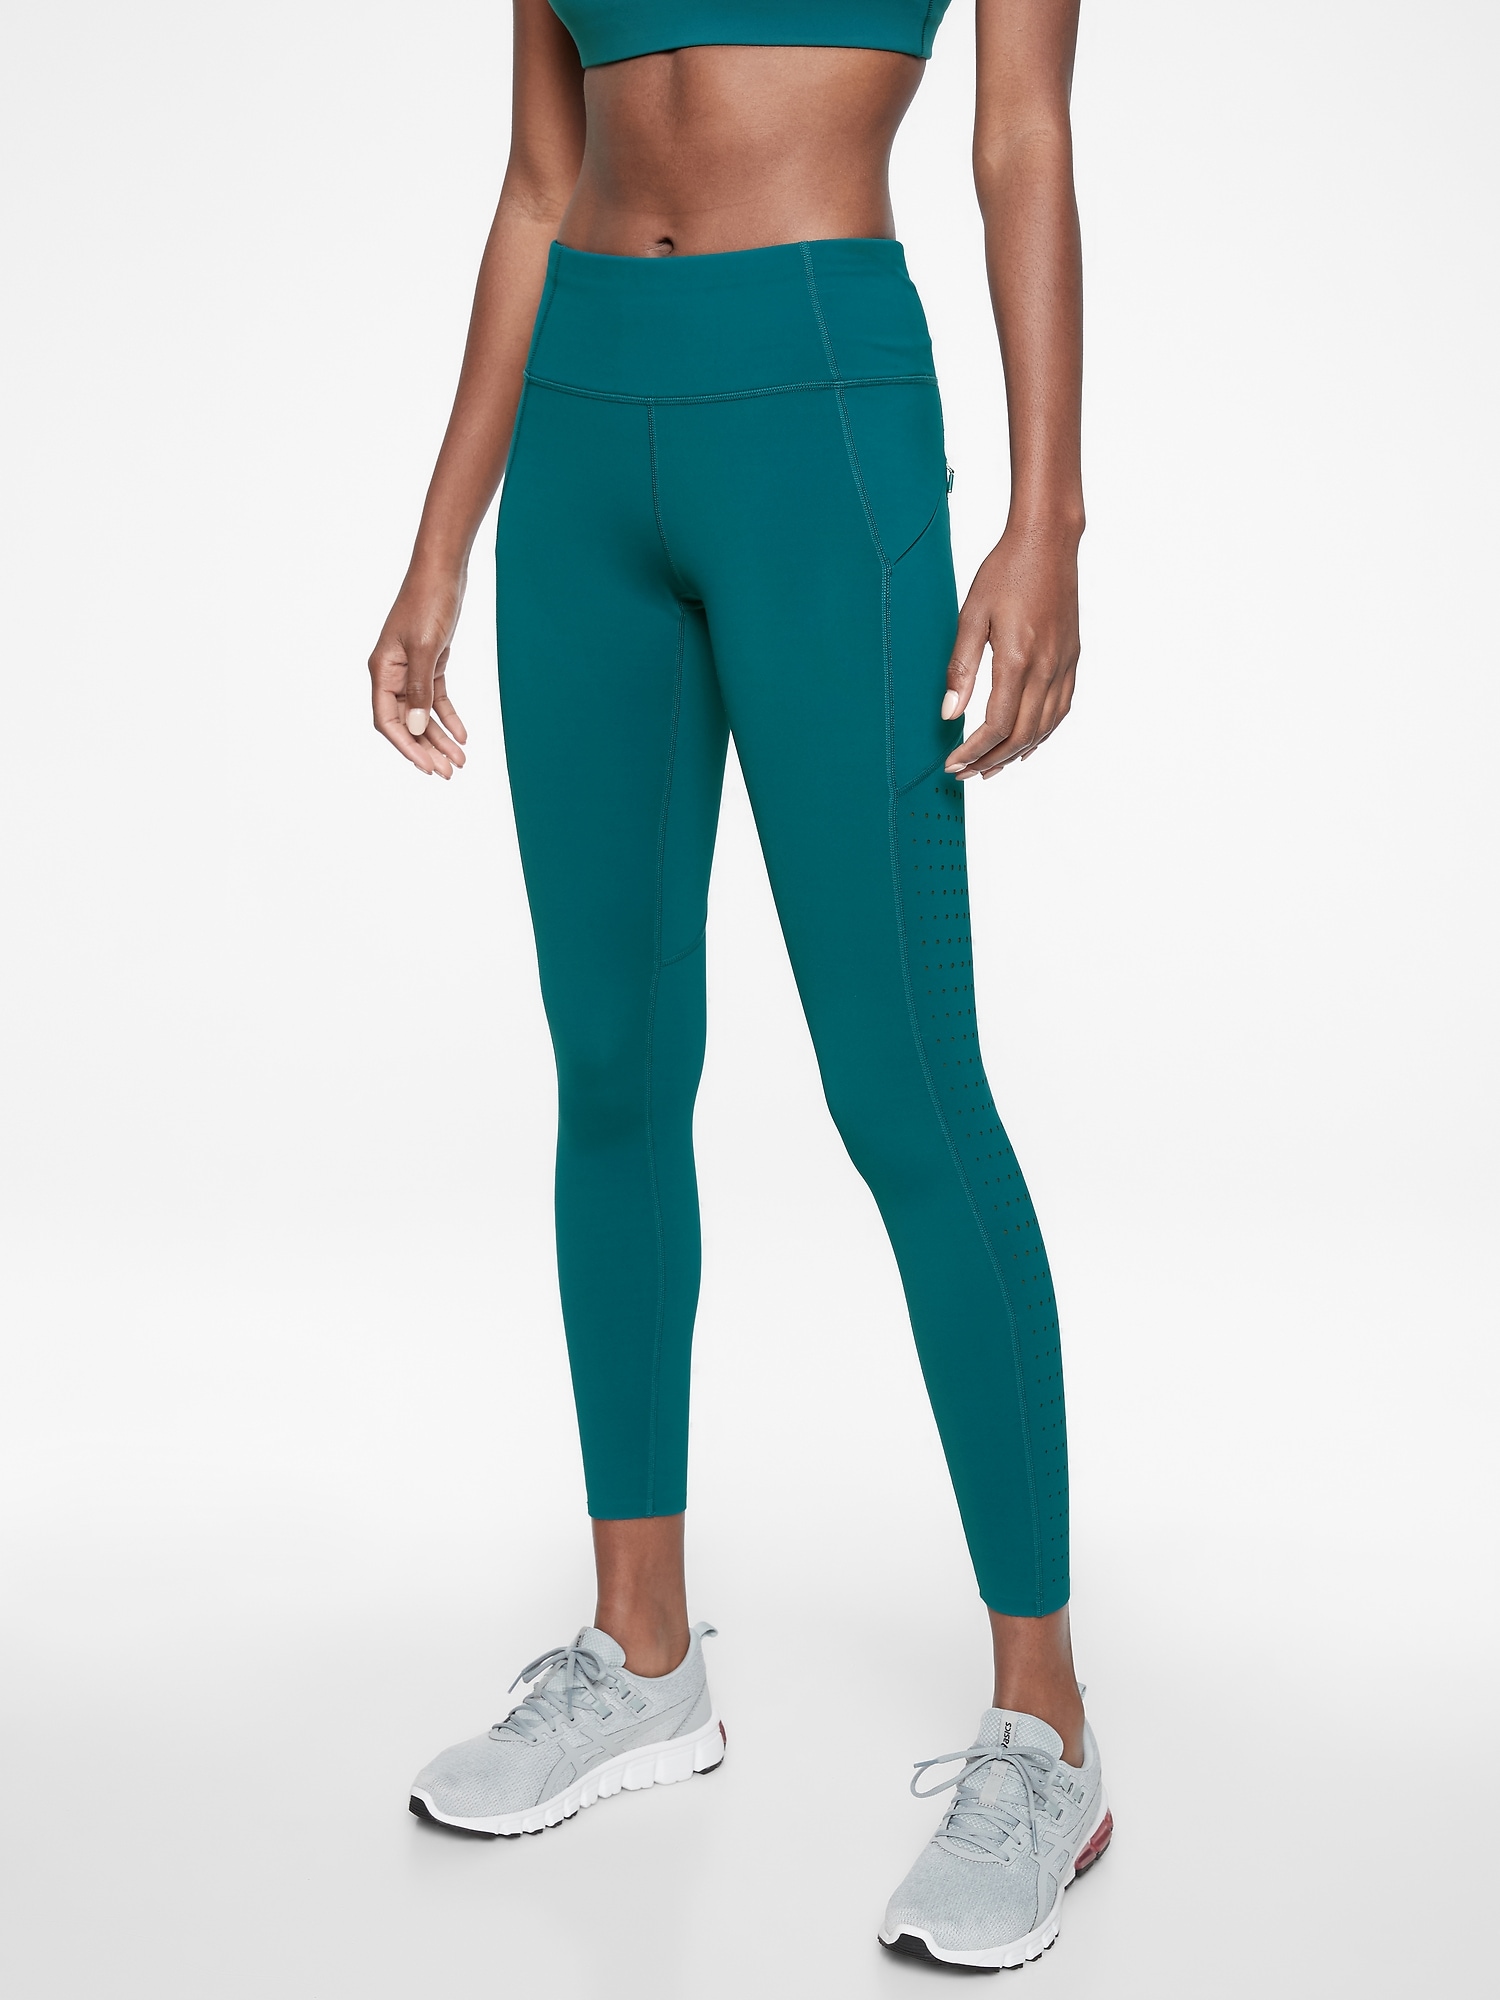 Athleta Oasis Contender 7/8 Tight Pants Womens Extra Small XS Teal Floral  Yoga